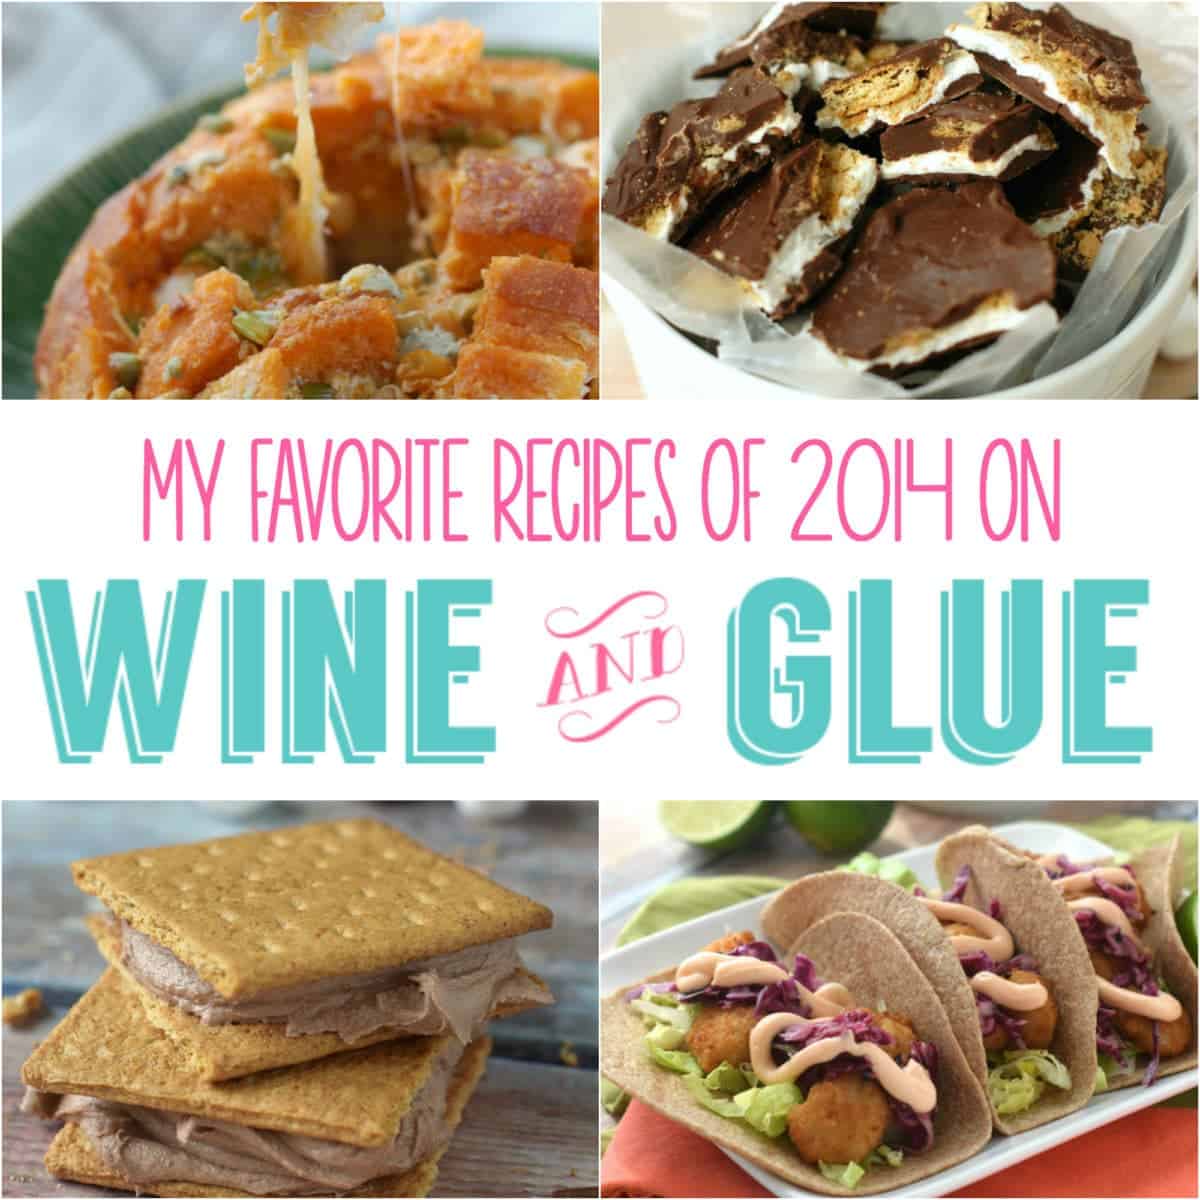 My top favorite recipes of 2014!  These were the recipes that I ate a TON of!  They barely escaped the photo shoot.